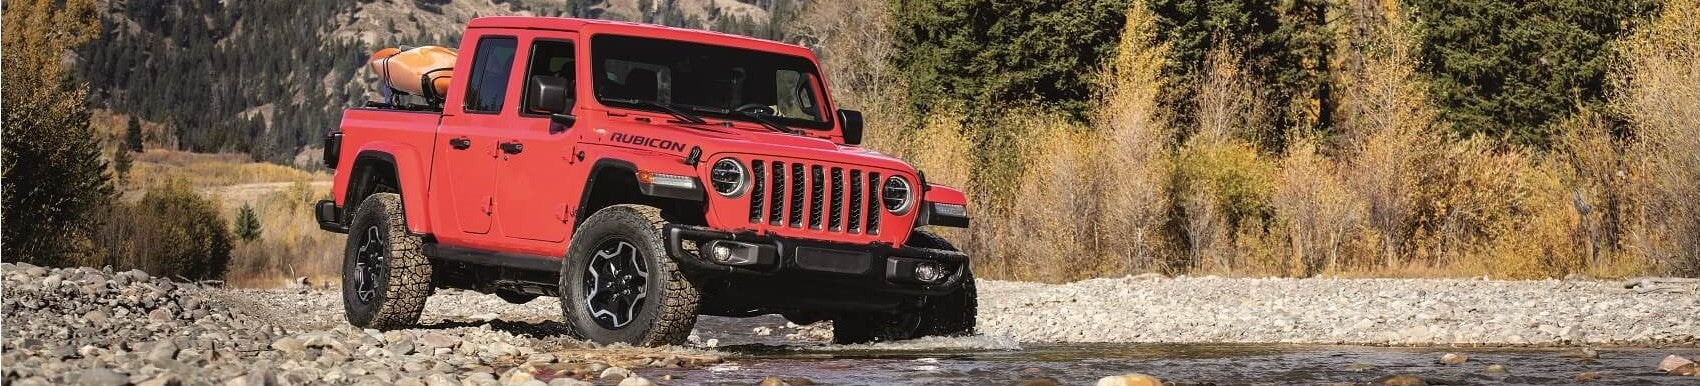 Jeep Gladiator in Red Snipped